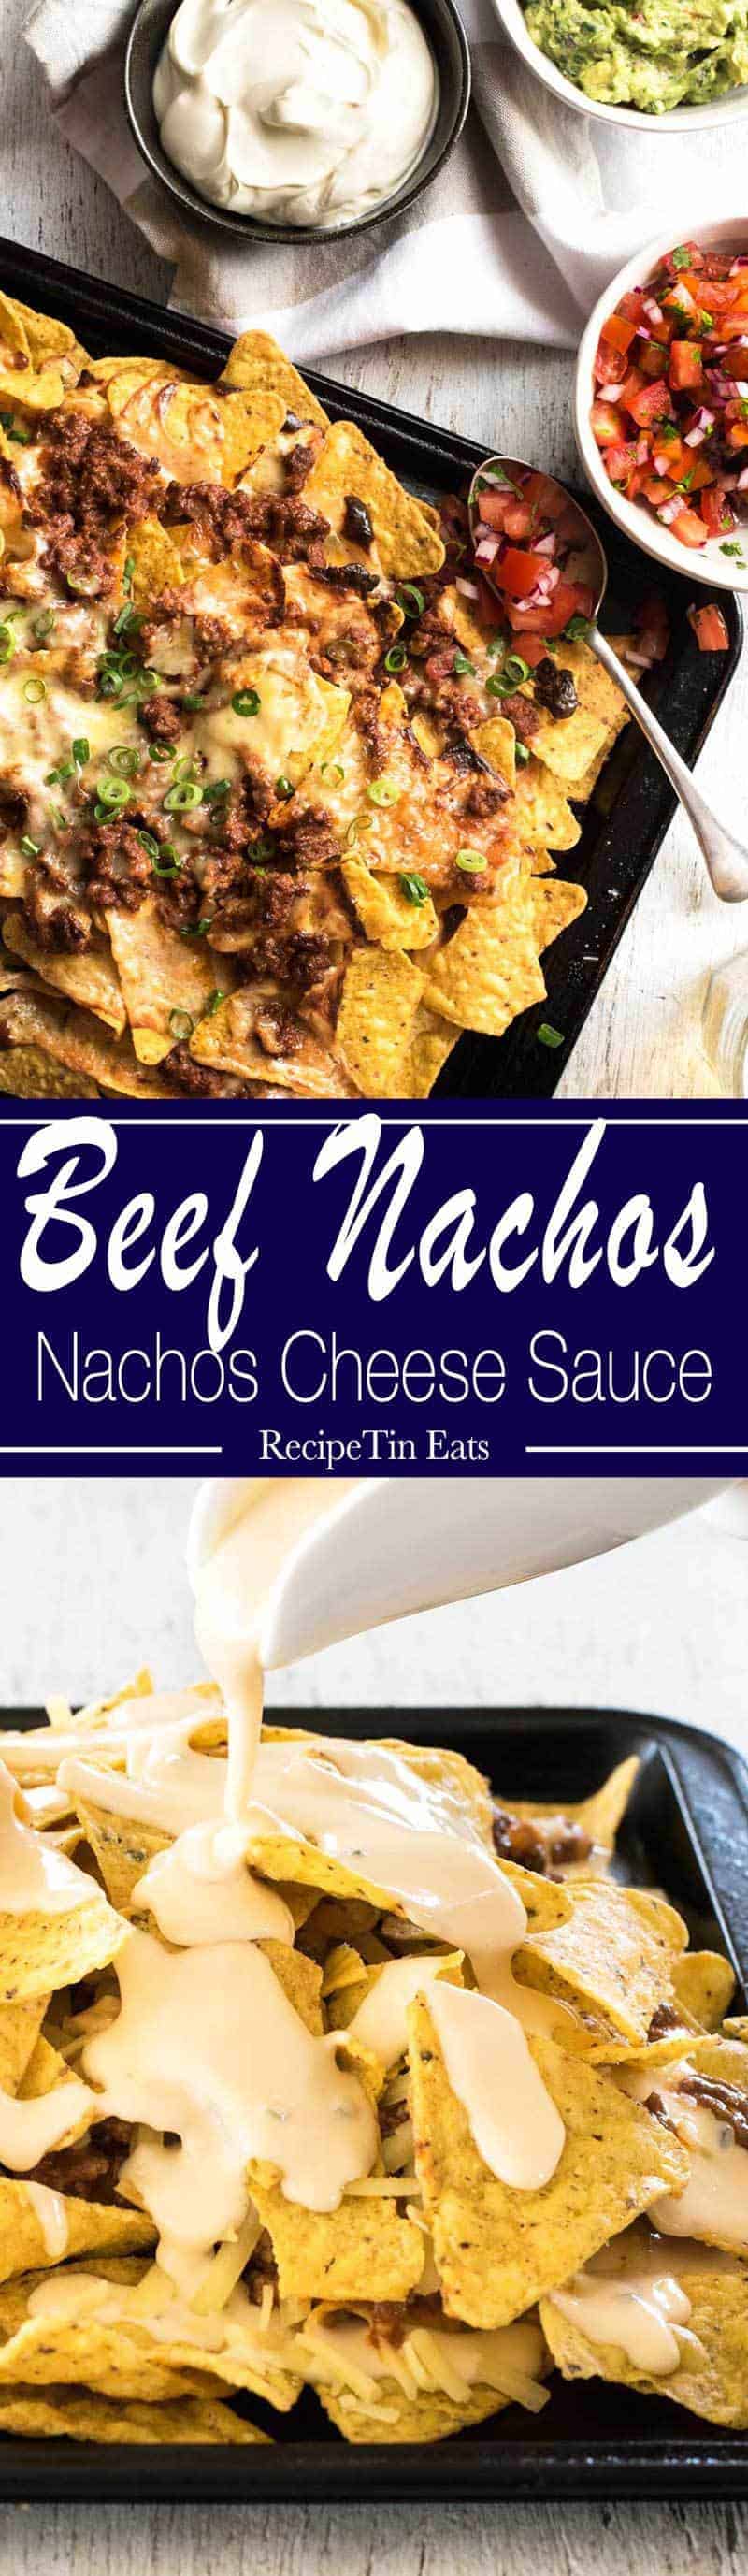 Beef Nachos - made this for book club, everyone went WILD over it!! The cheese sauce is what makes it!!!